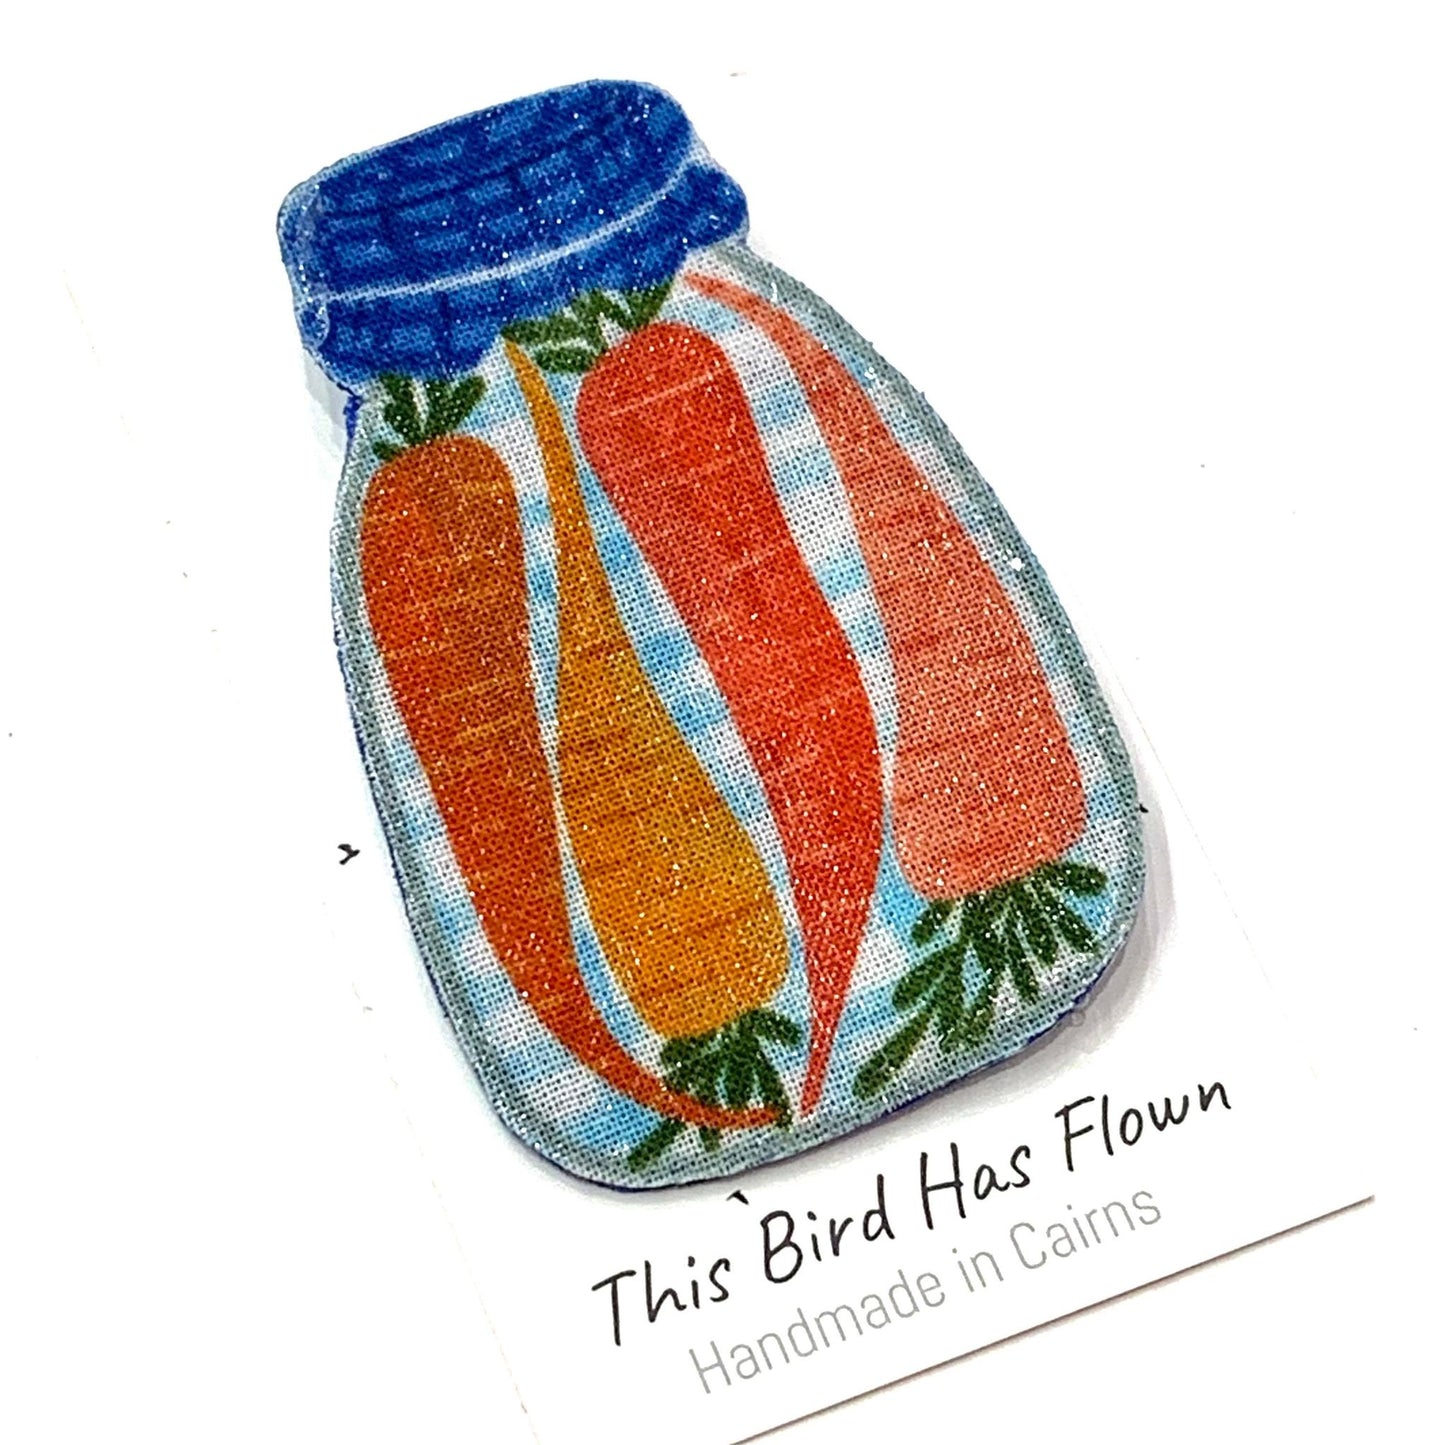 THIS BIRD HAS FLOWN- "Pickles & Preserves" Remnant Brooches- Large Pickled Carrots Jar